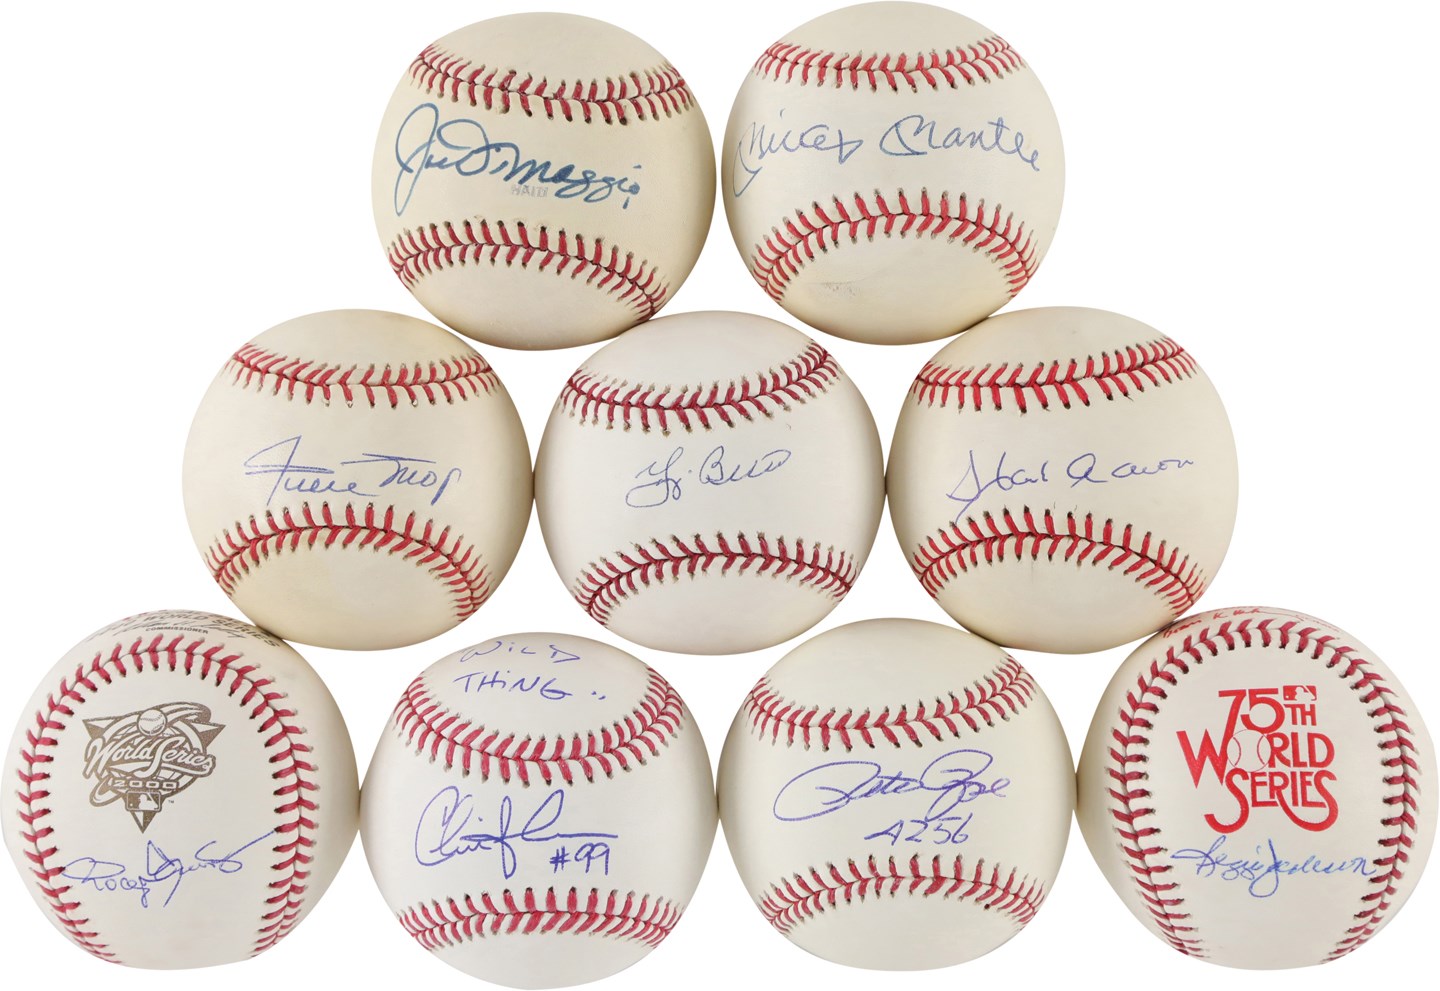 Baseball Autographs - Hall of Famers and Stars Single Signed Baseballs w/Mantle & DiMaggio (9)